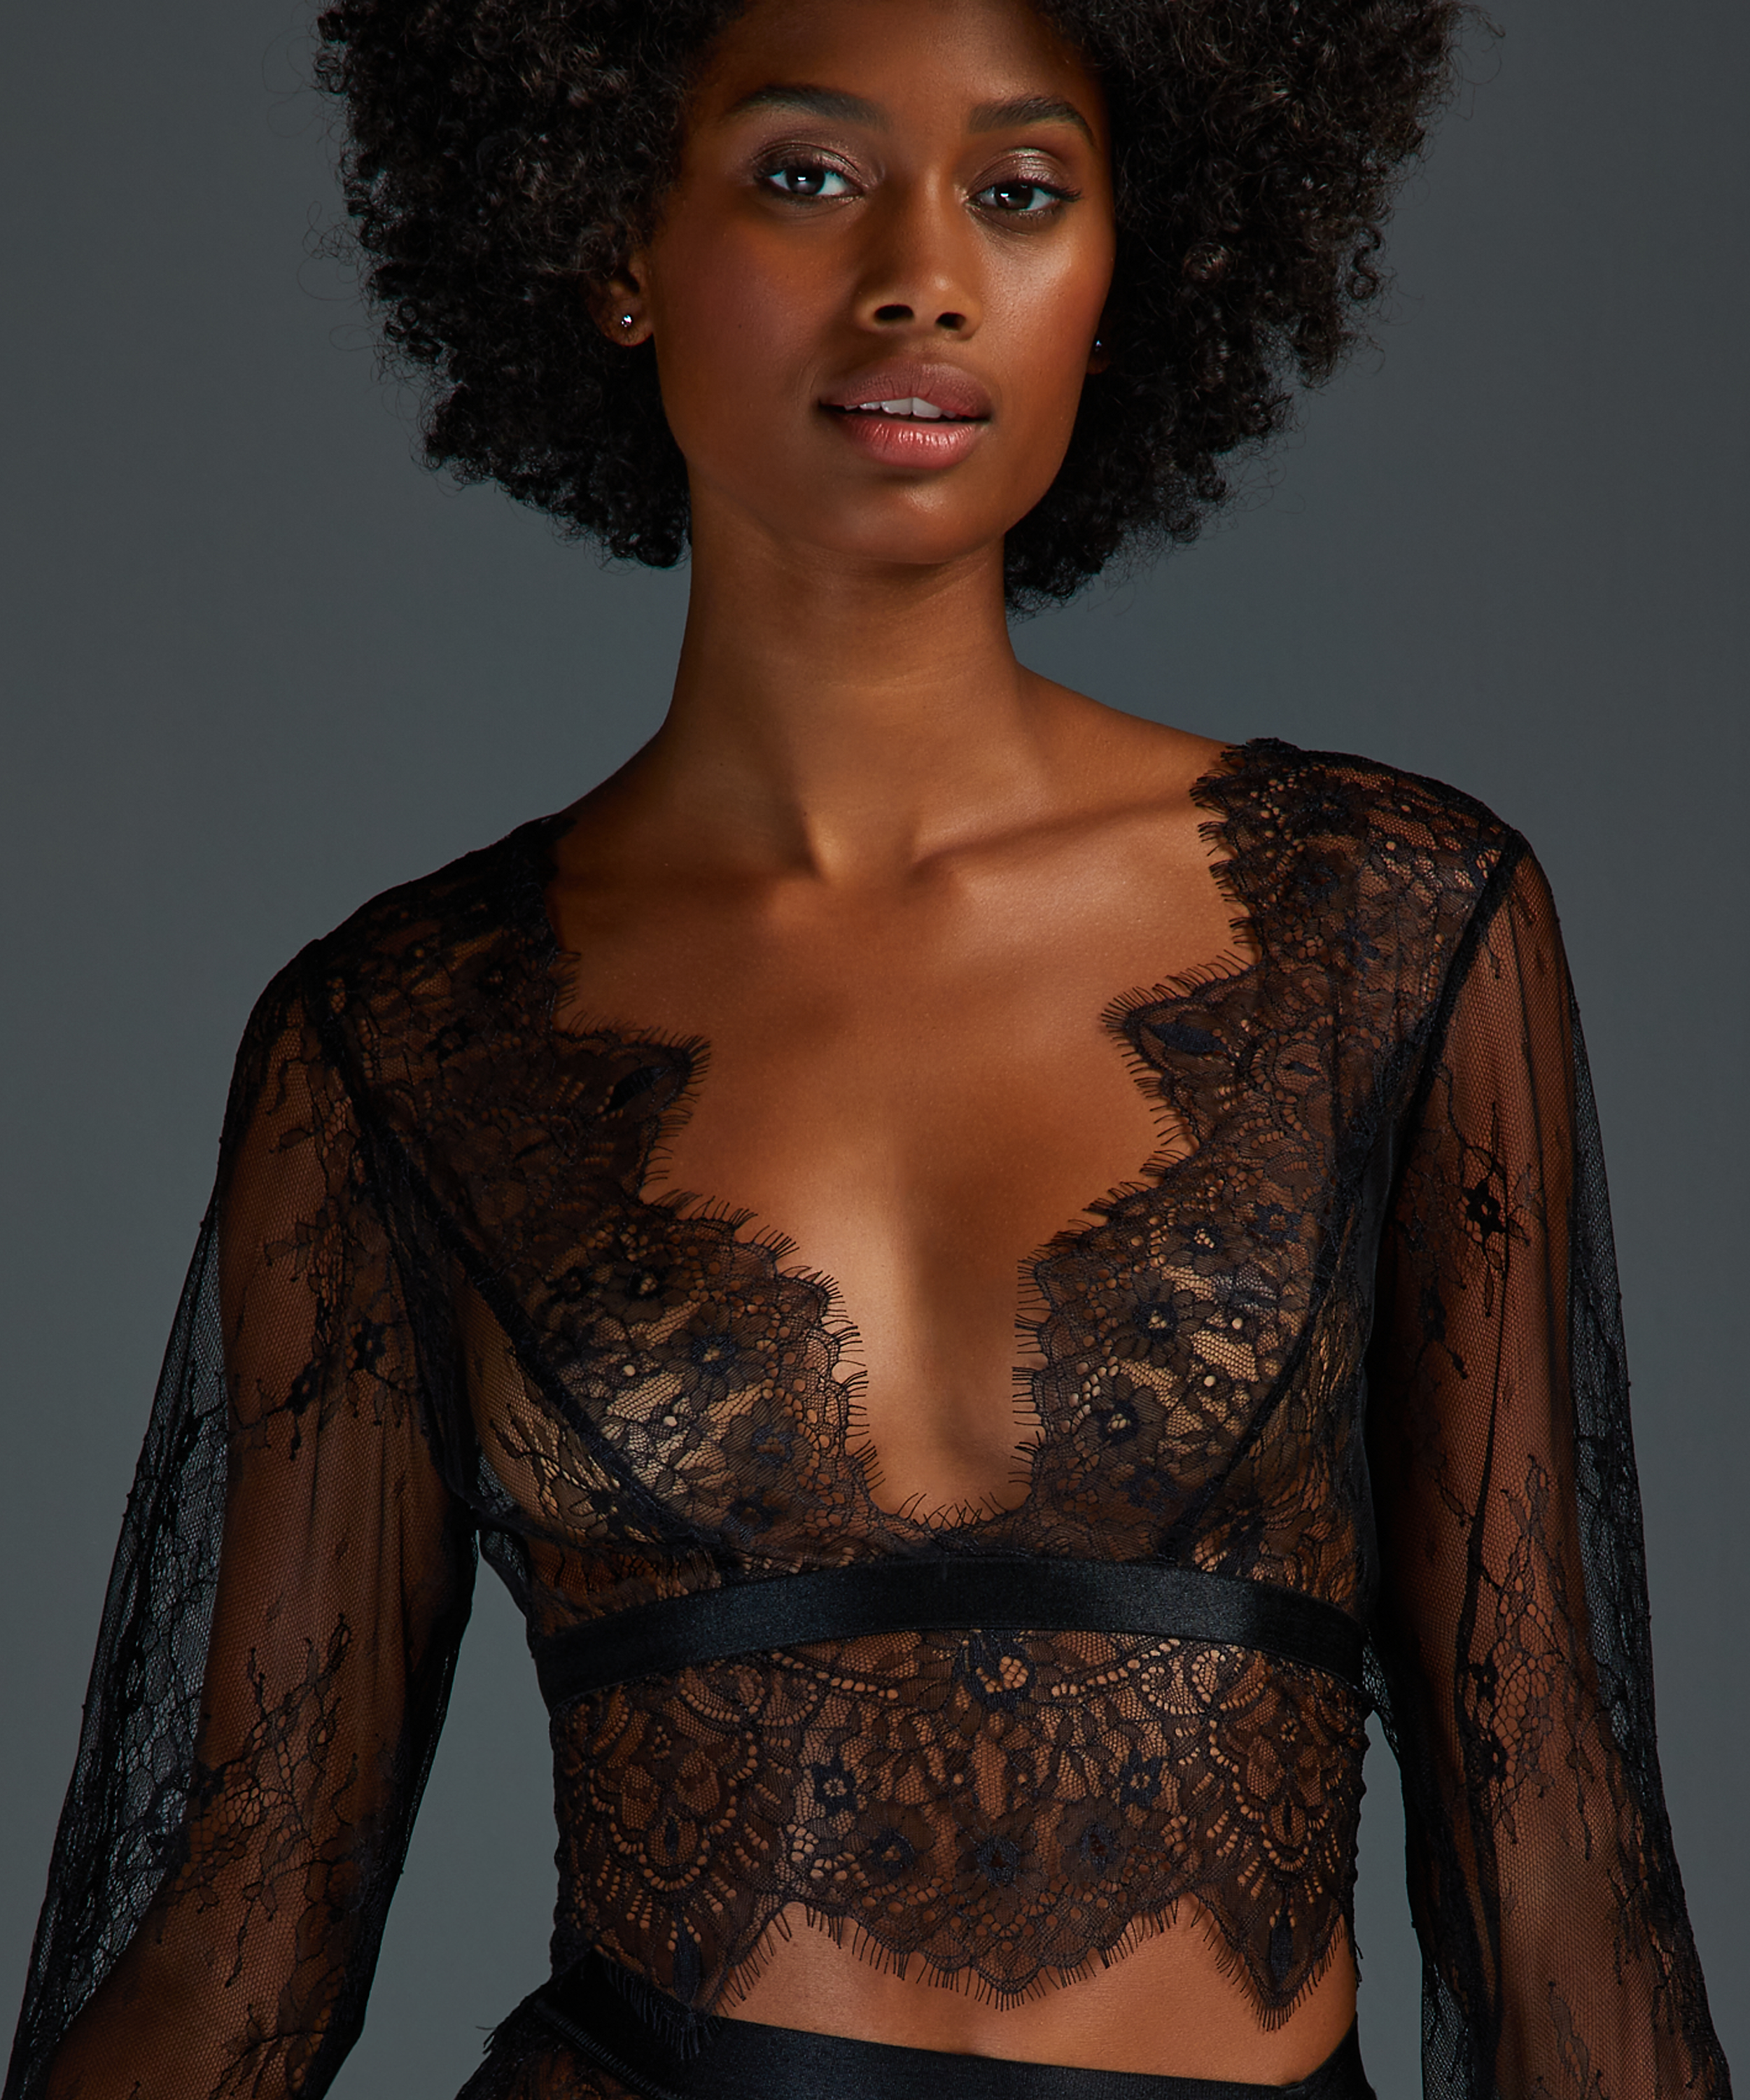 All-over Lace Top for €27.99 - Pajama Tops - Hunkemöller